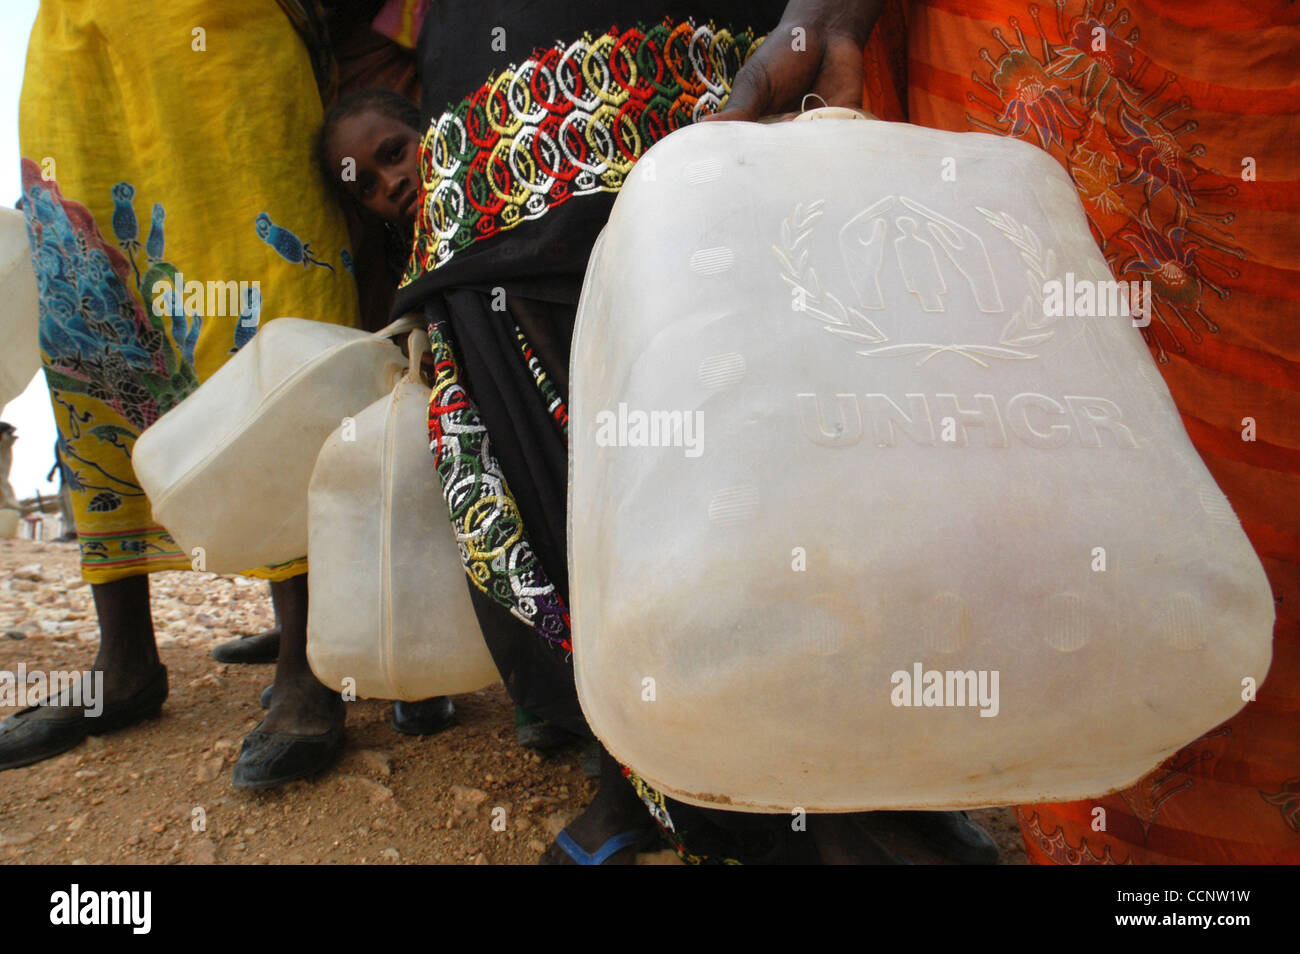 July 16, 2004, Abeche, Chad - Female refugees from neighboring Darfur, Sudan, carry water jugs provided by the United Nations to fetch clean drinking water delivered by an aid agency to a refugee camp in Eastern Chad.  (Credit: David Snyder/ZUMA Press) Stock Photo